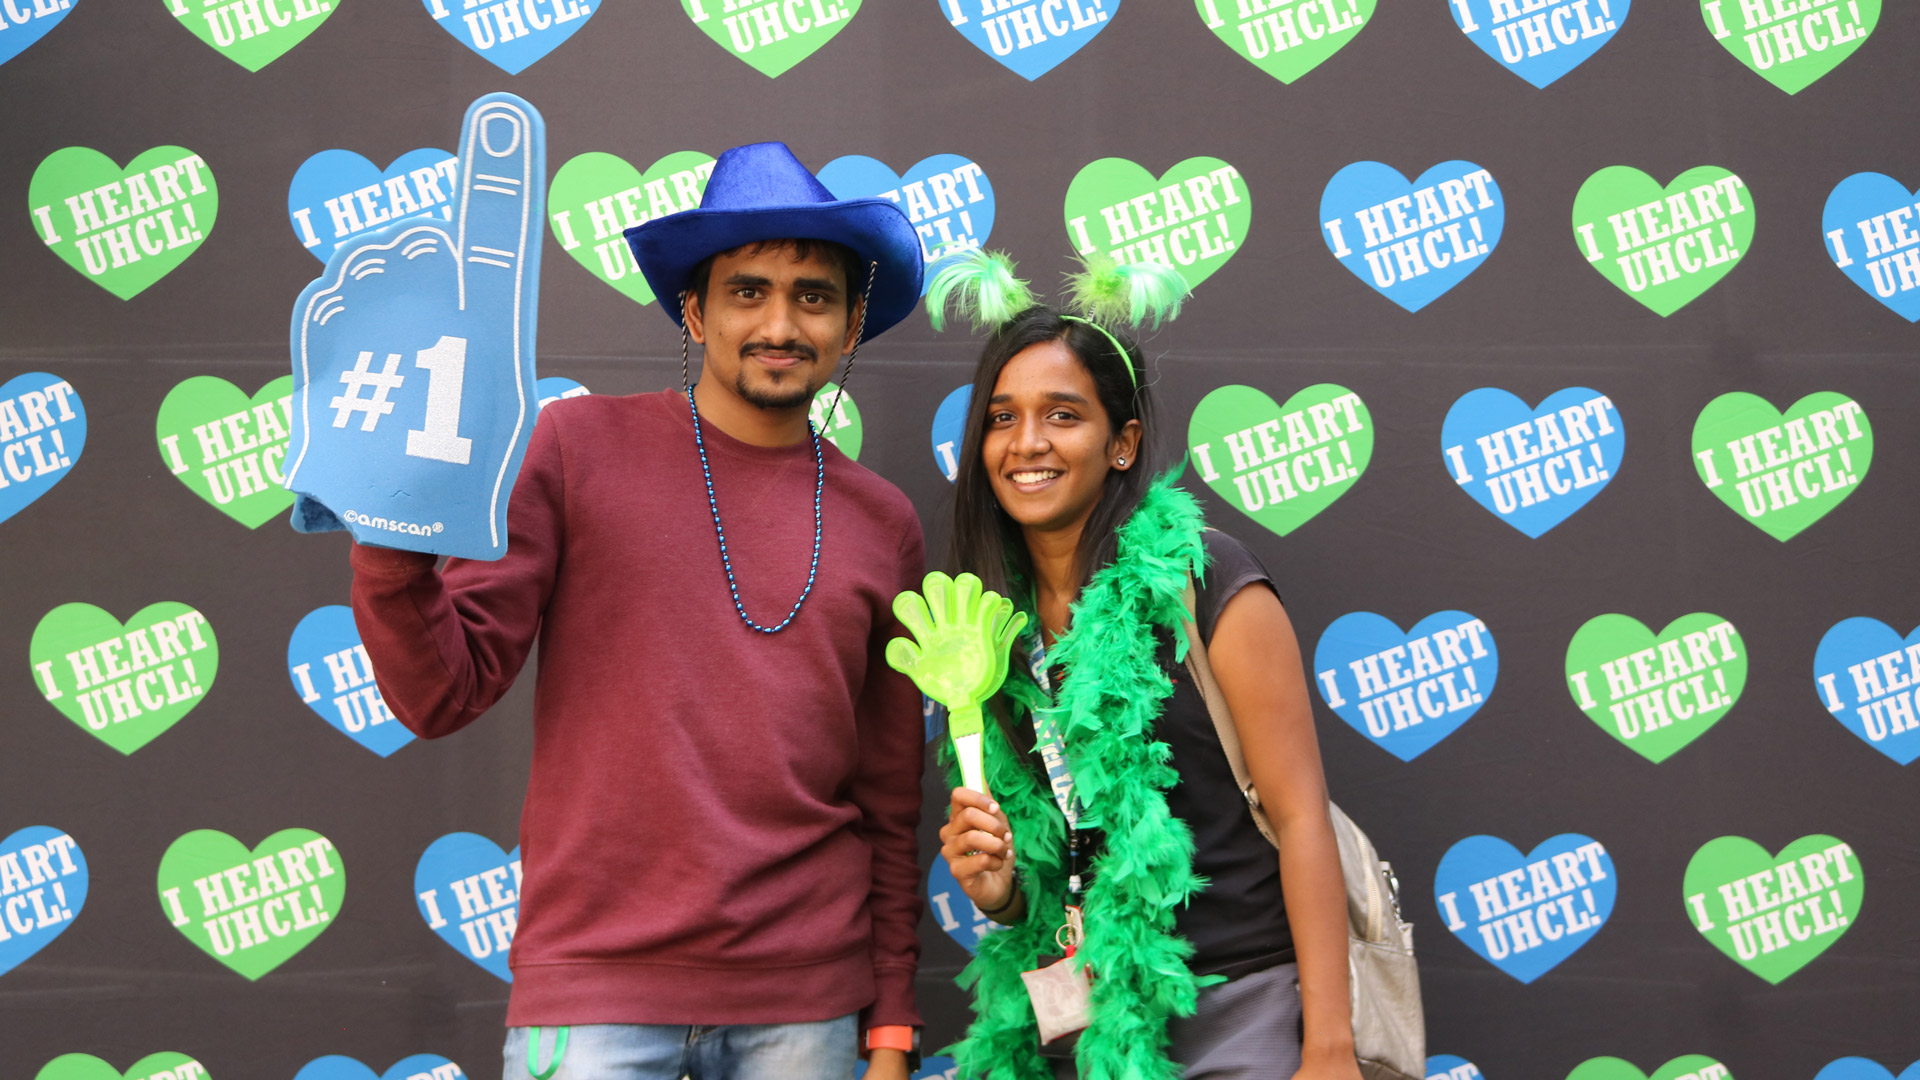 Two students sport blue and green hats, boas, and foam fingers for I Heart UHCL Day